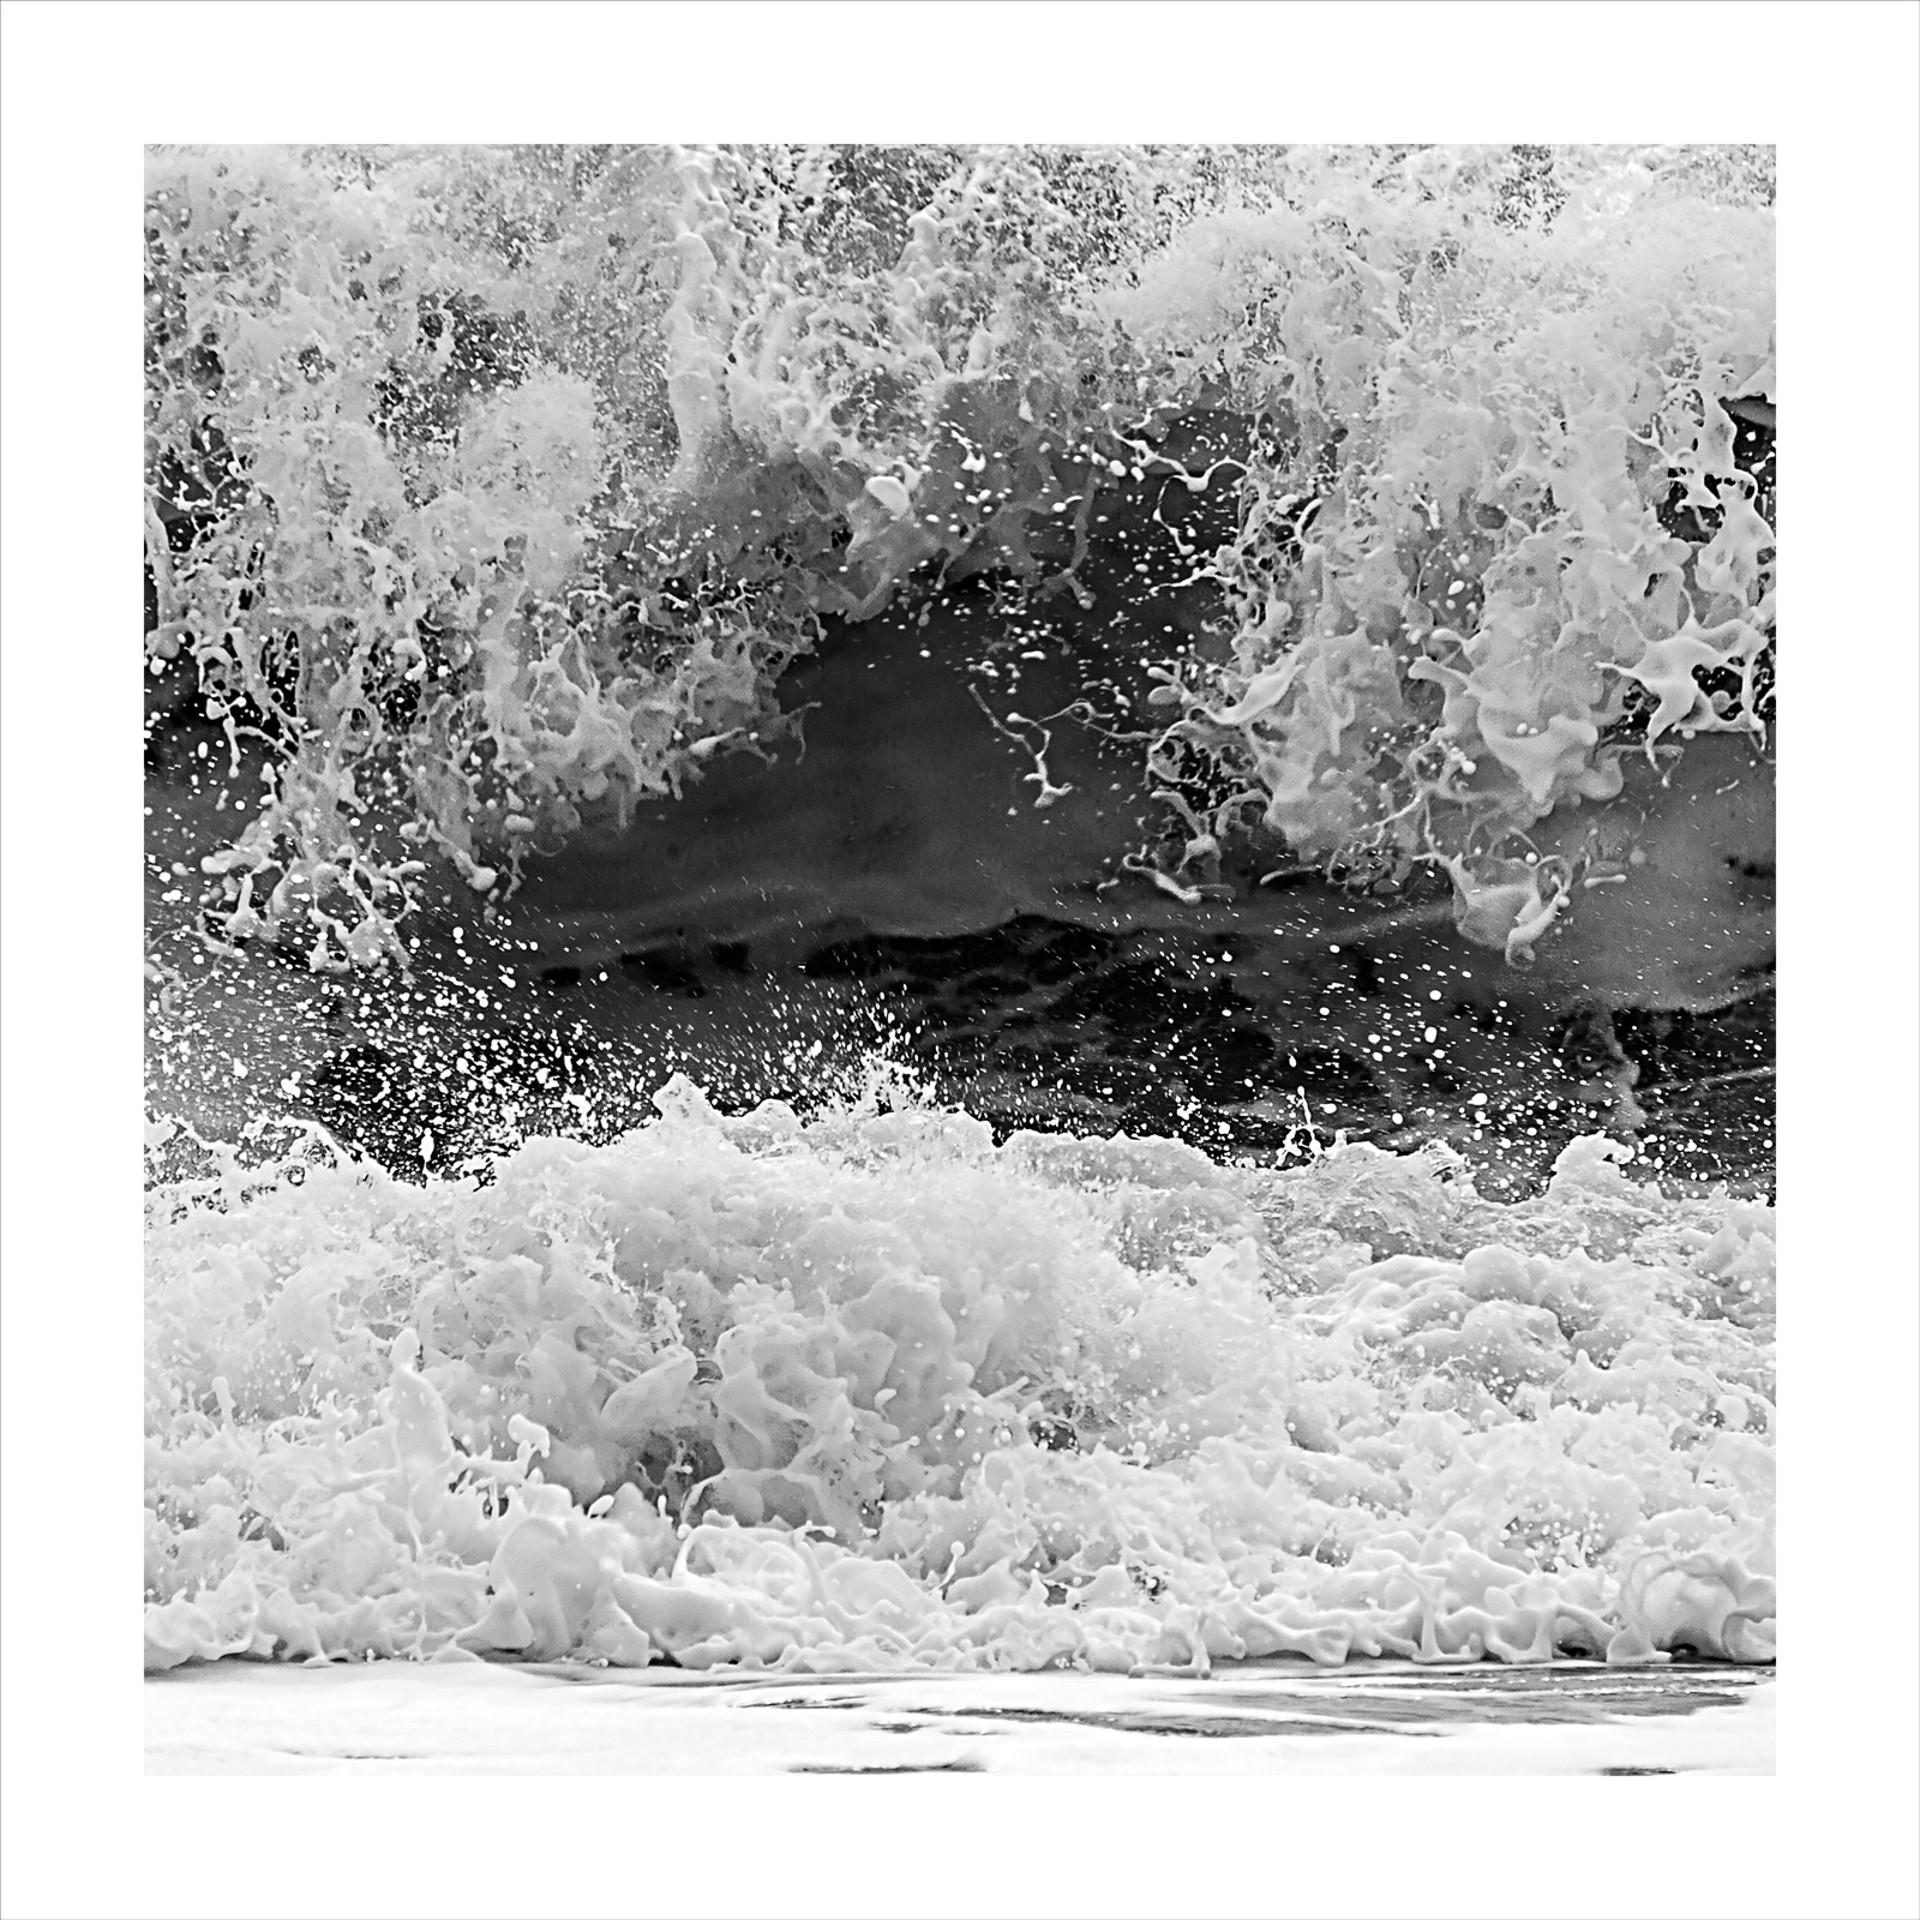 Force Of Nature-  5S5A7394 Crop 5 (Three inch border-white frame) by Bob Tabor